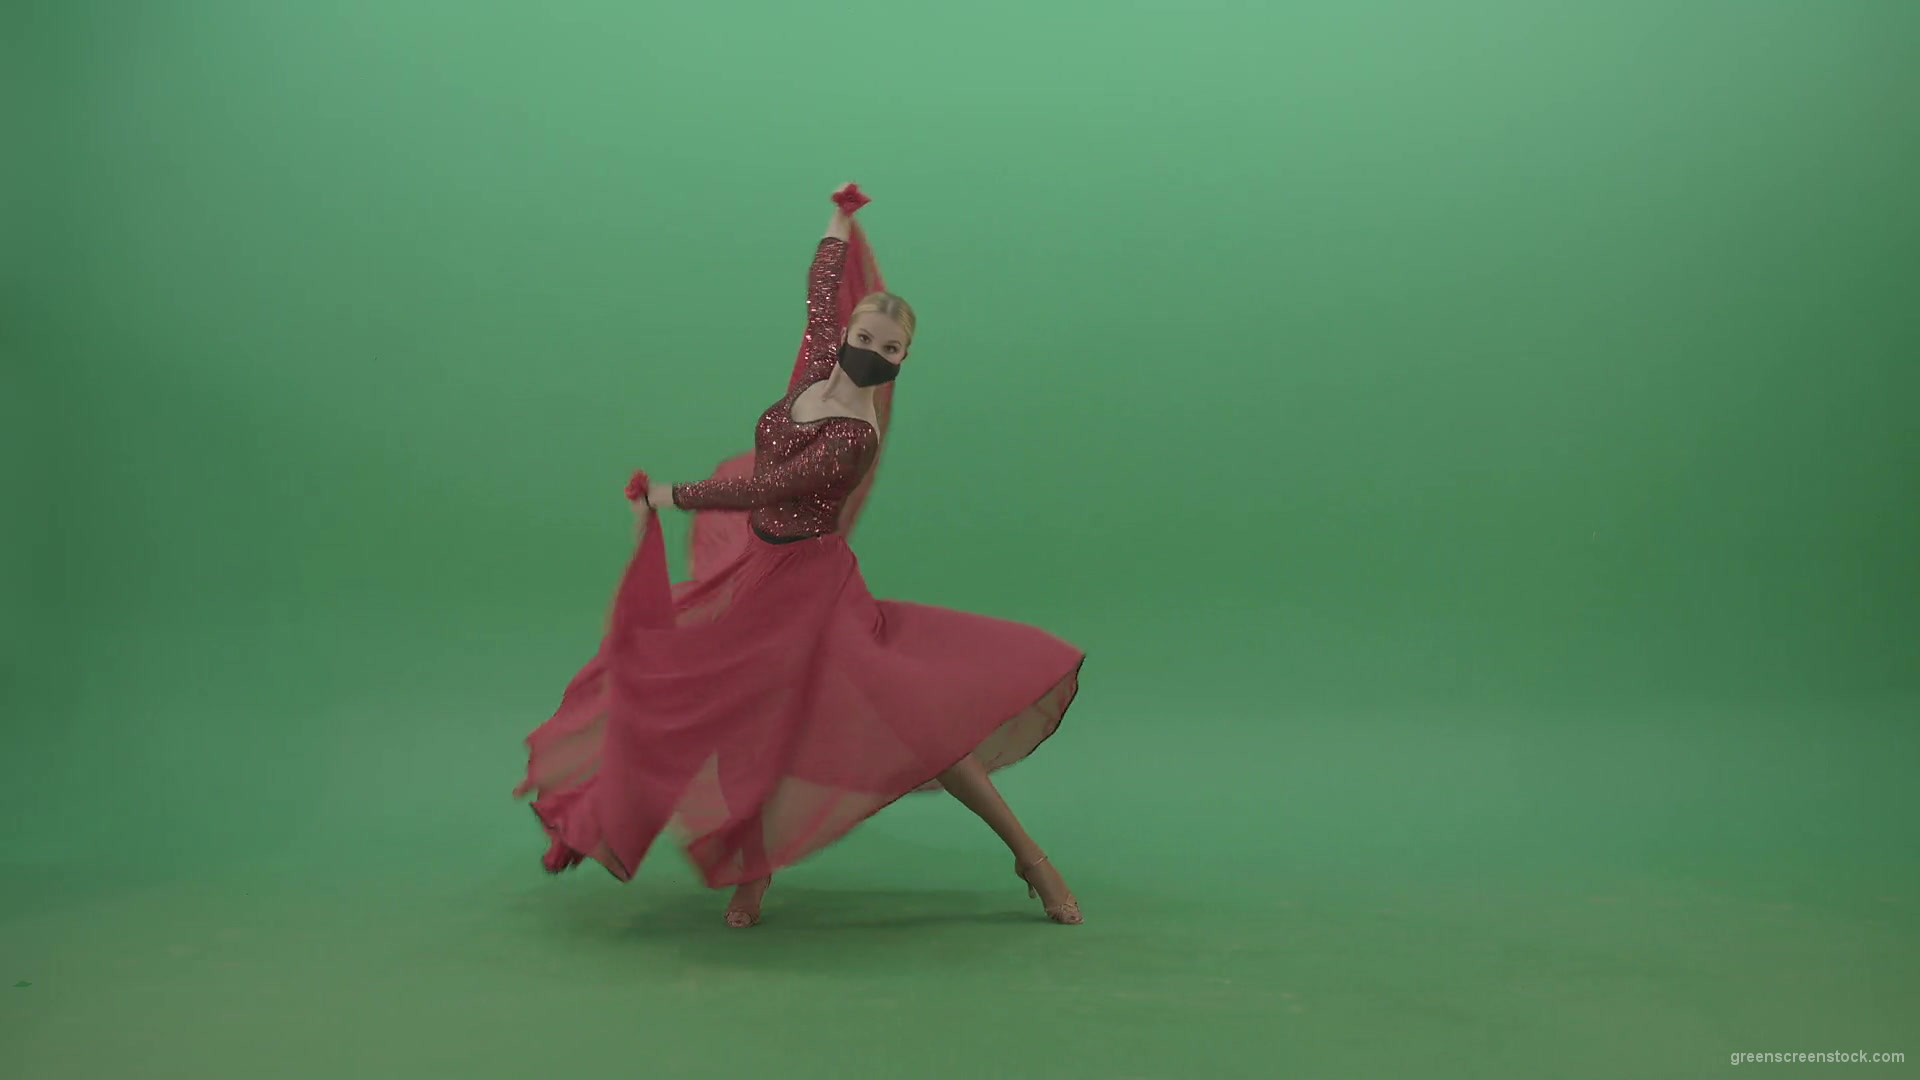 Blonde-Girl-in-red-Flamenco-Dress-makes-spinning-bowing-isolated-on-green-screen-4K-Video-Footage-1920_004 Green Screen Stock